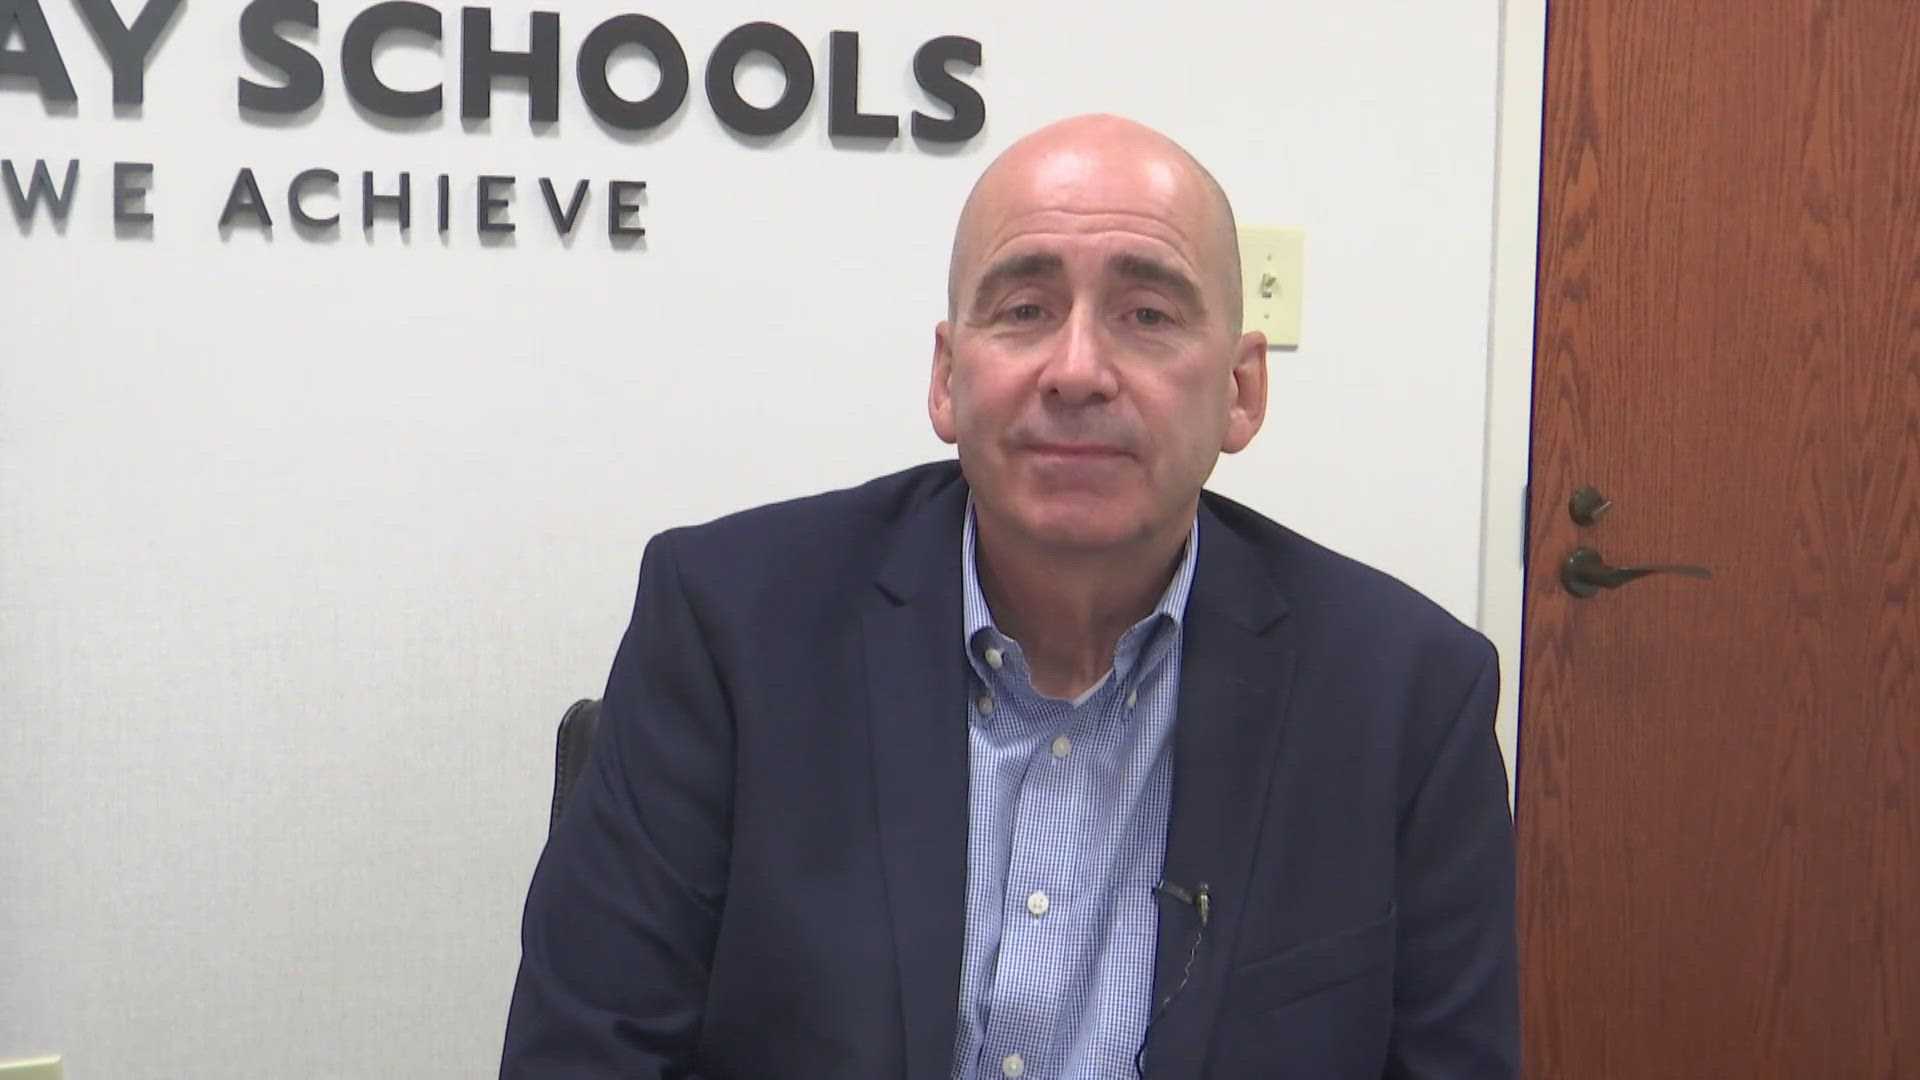 Dr. Michael Beresford announced Monday he's retiring as superintendent of Carmel Clay Schools at the end of the upcoming school year.